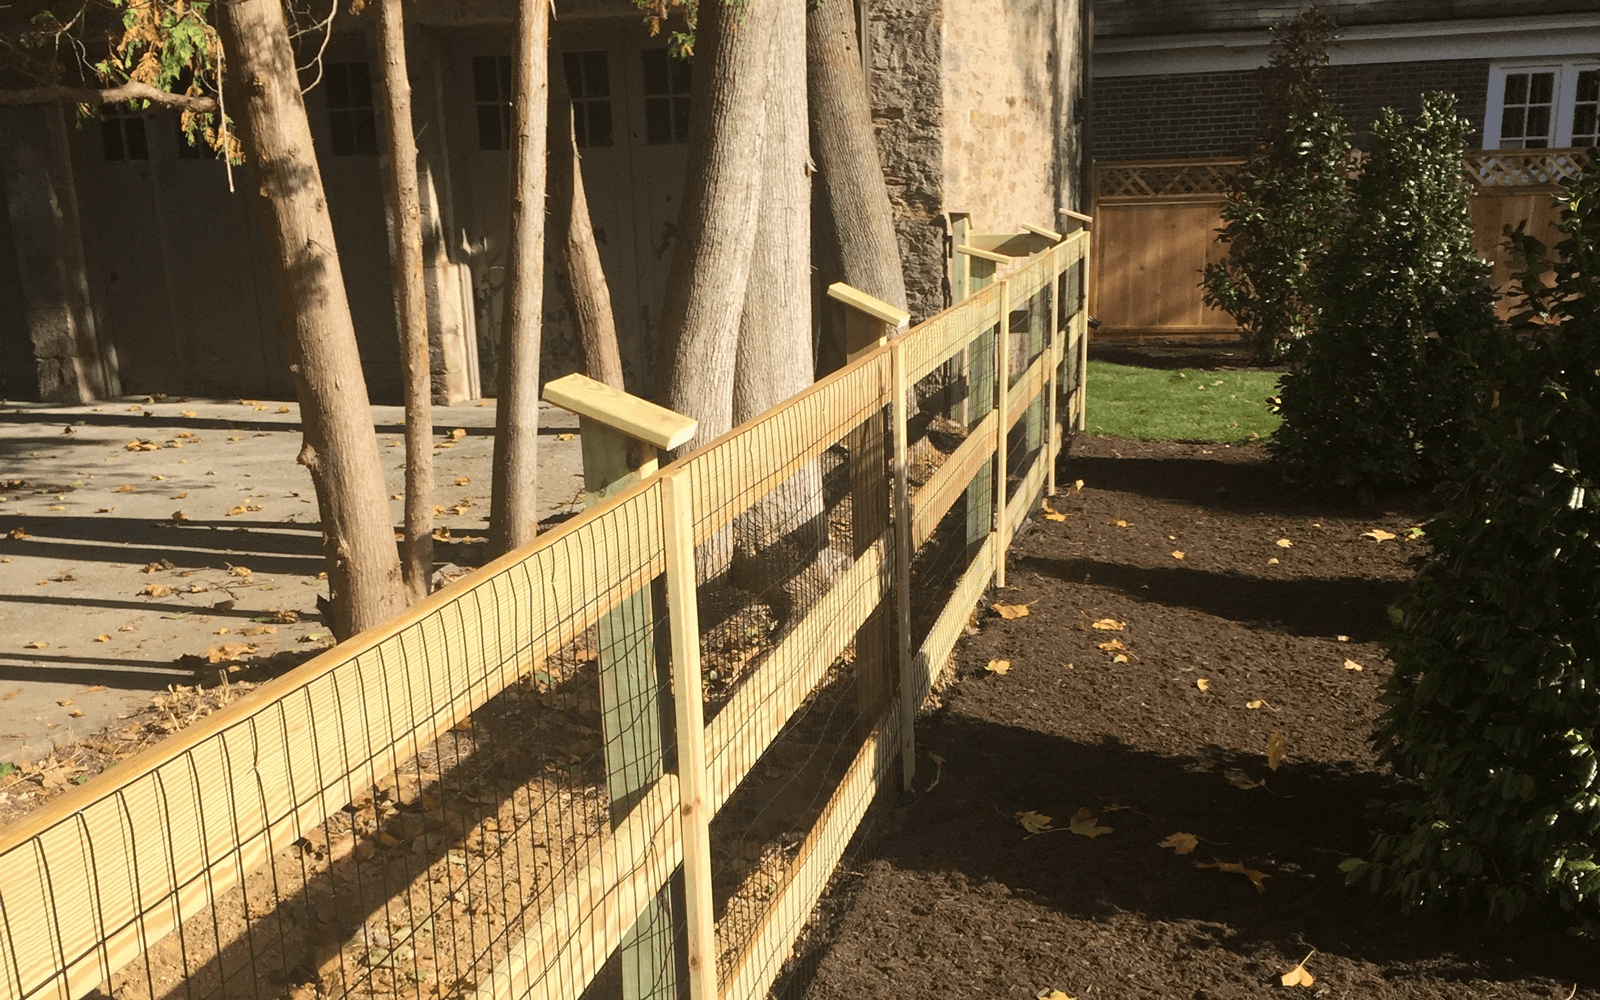 A wooden fence in a yard with mulch